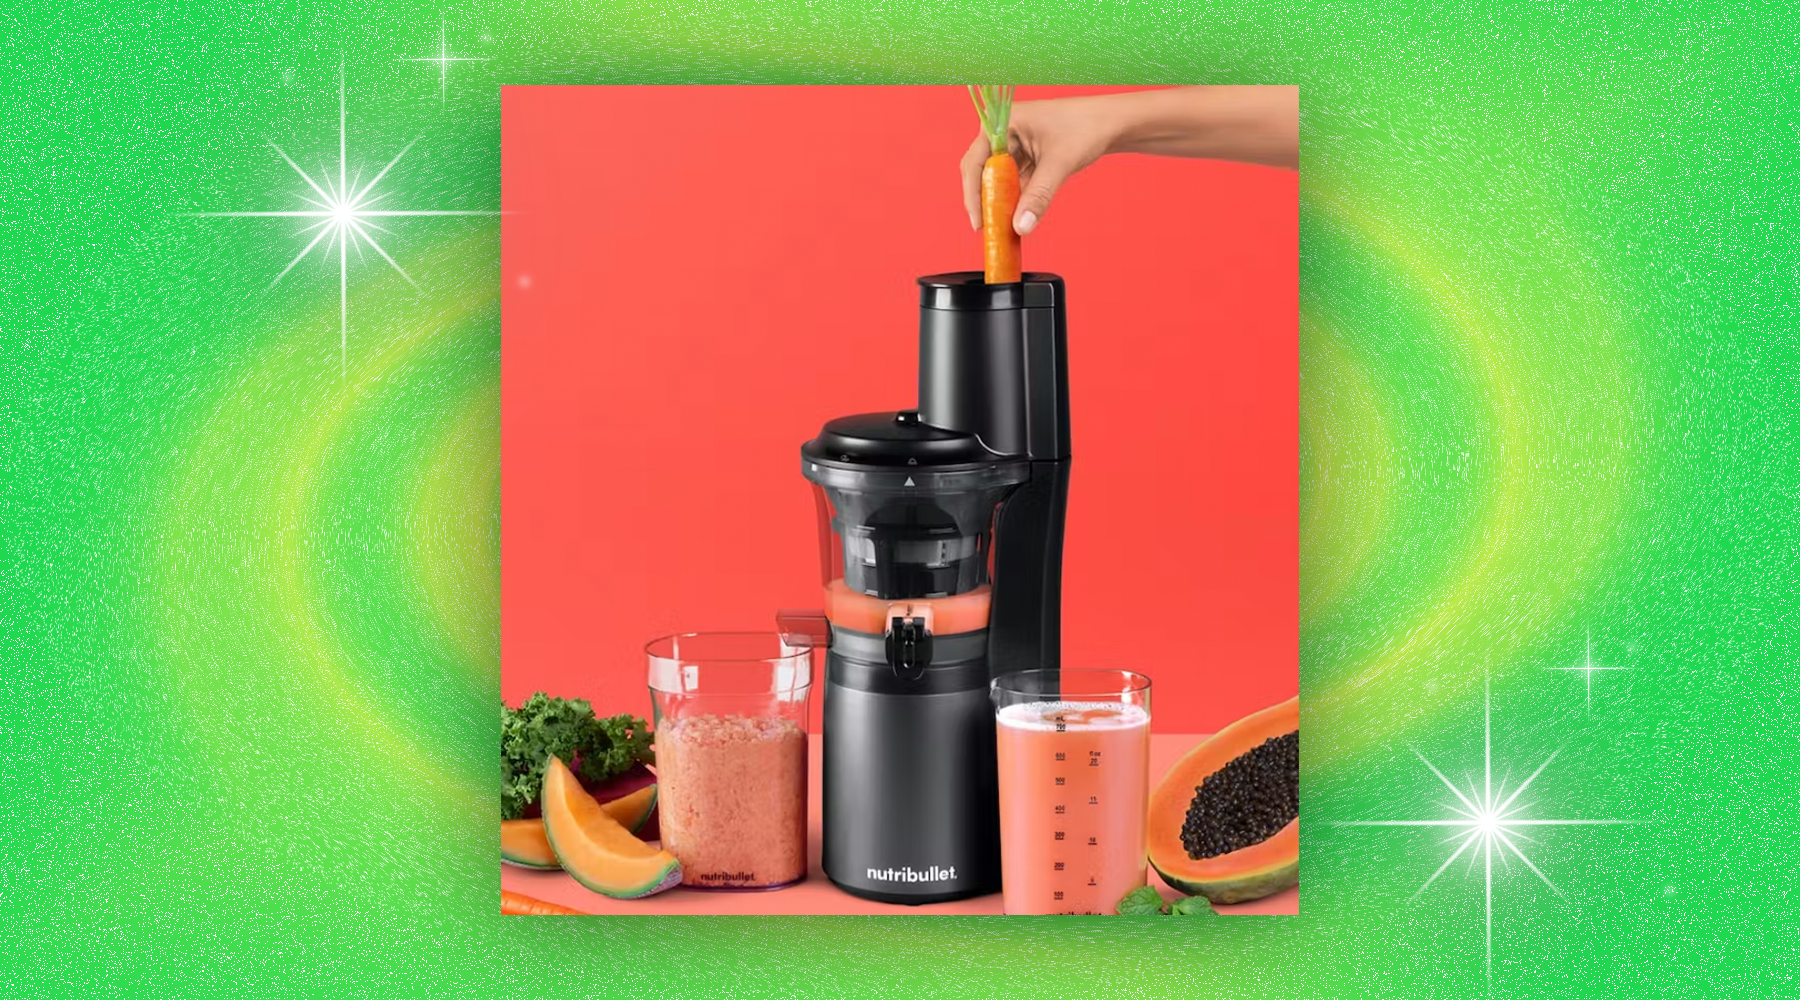 Review The Nutribullet Slow Juicer Made Me a Wellness